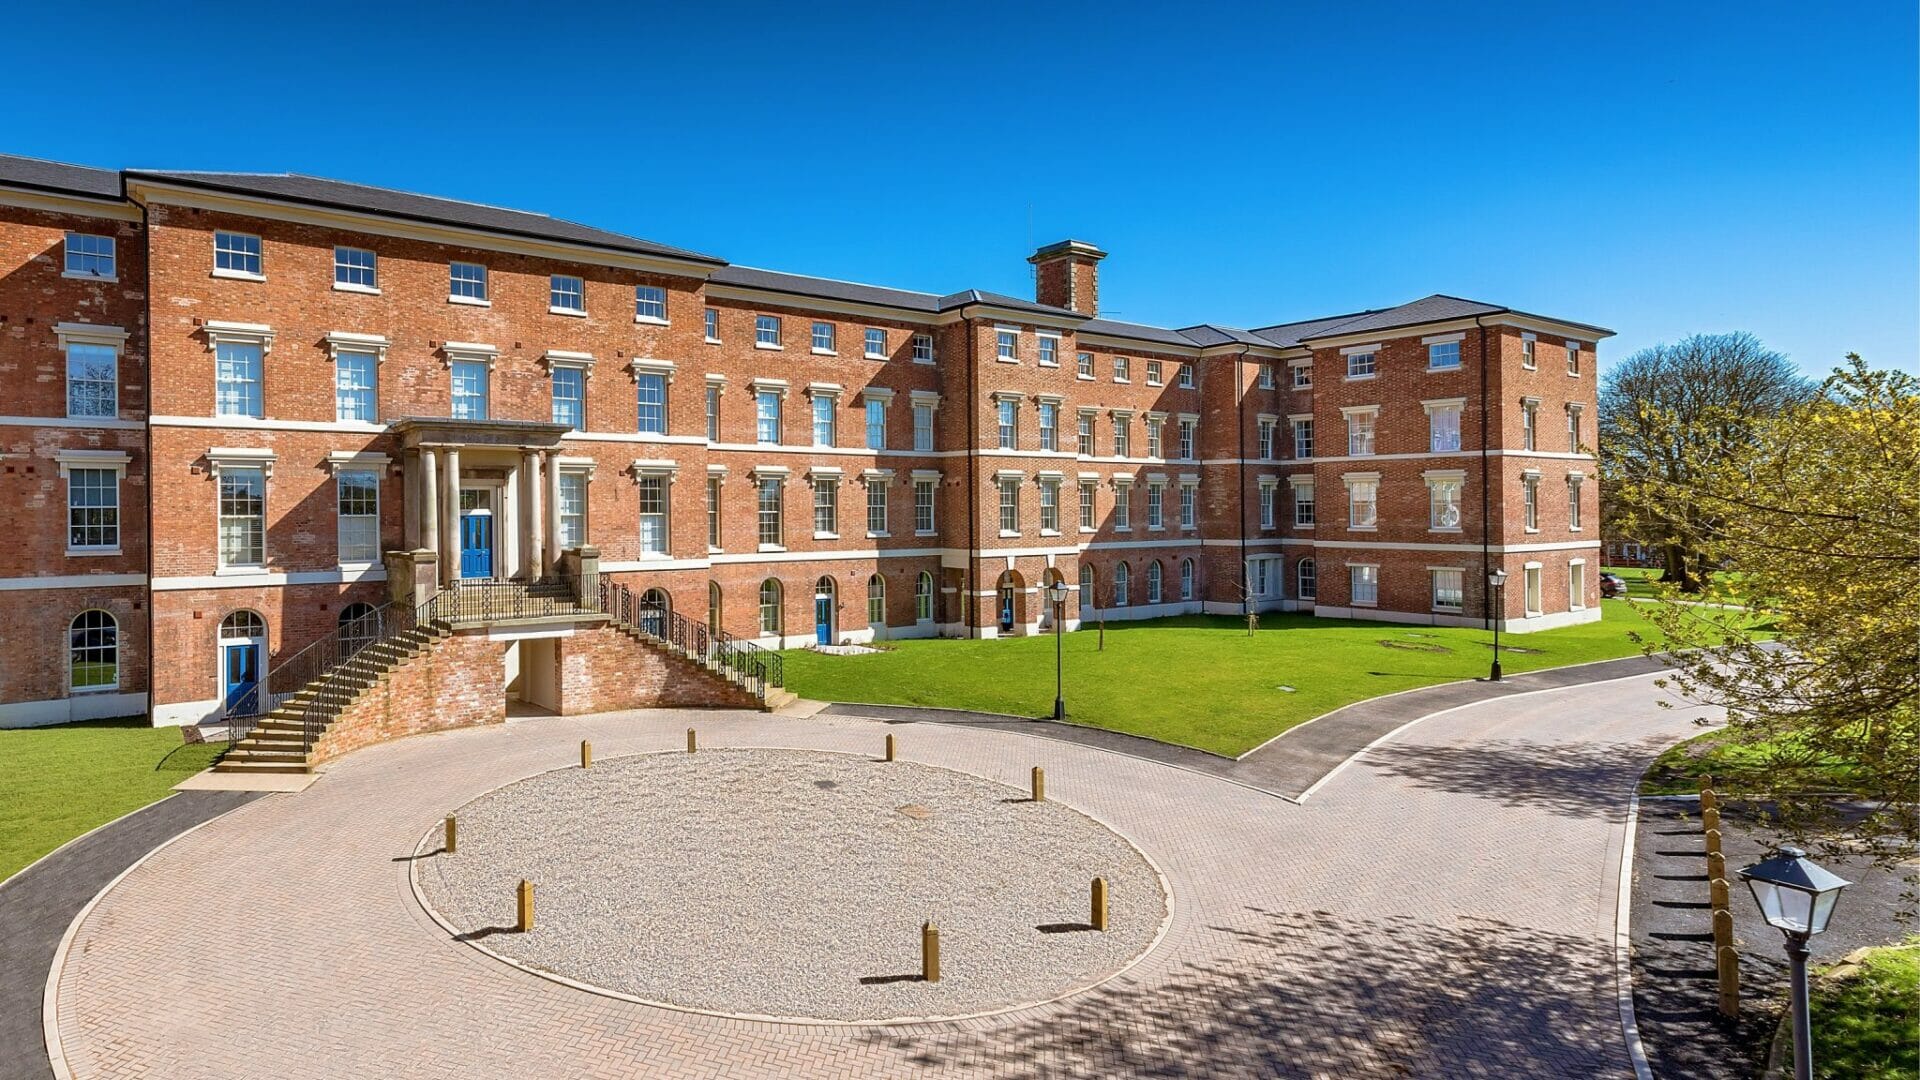 Abandoned hospital given luxurious lease of life @russellrooftile